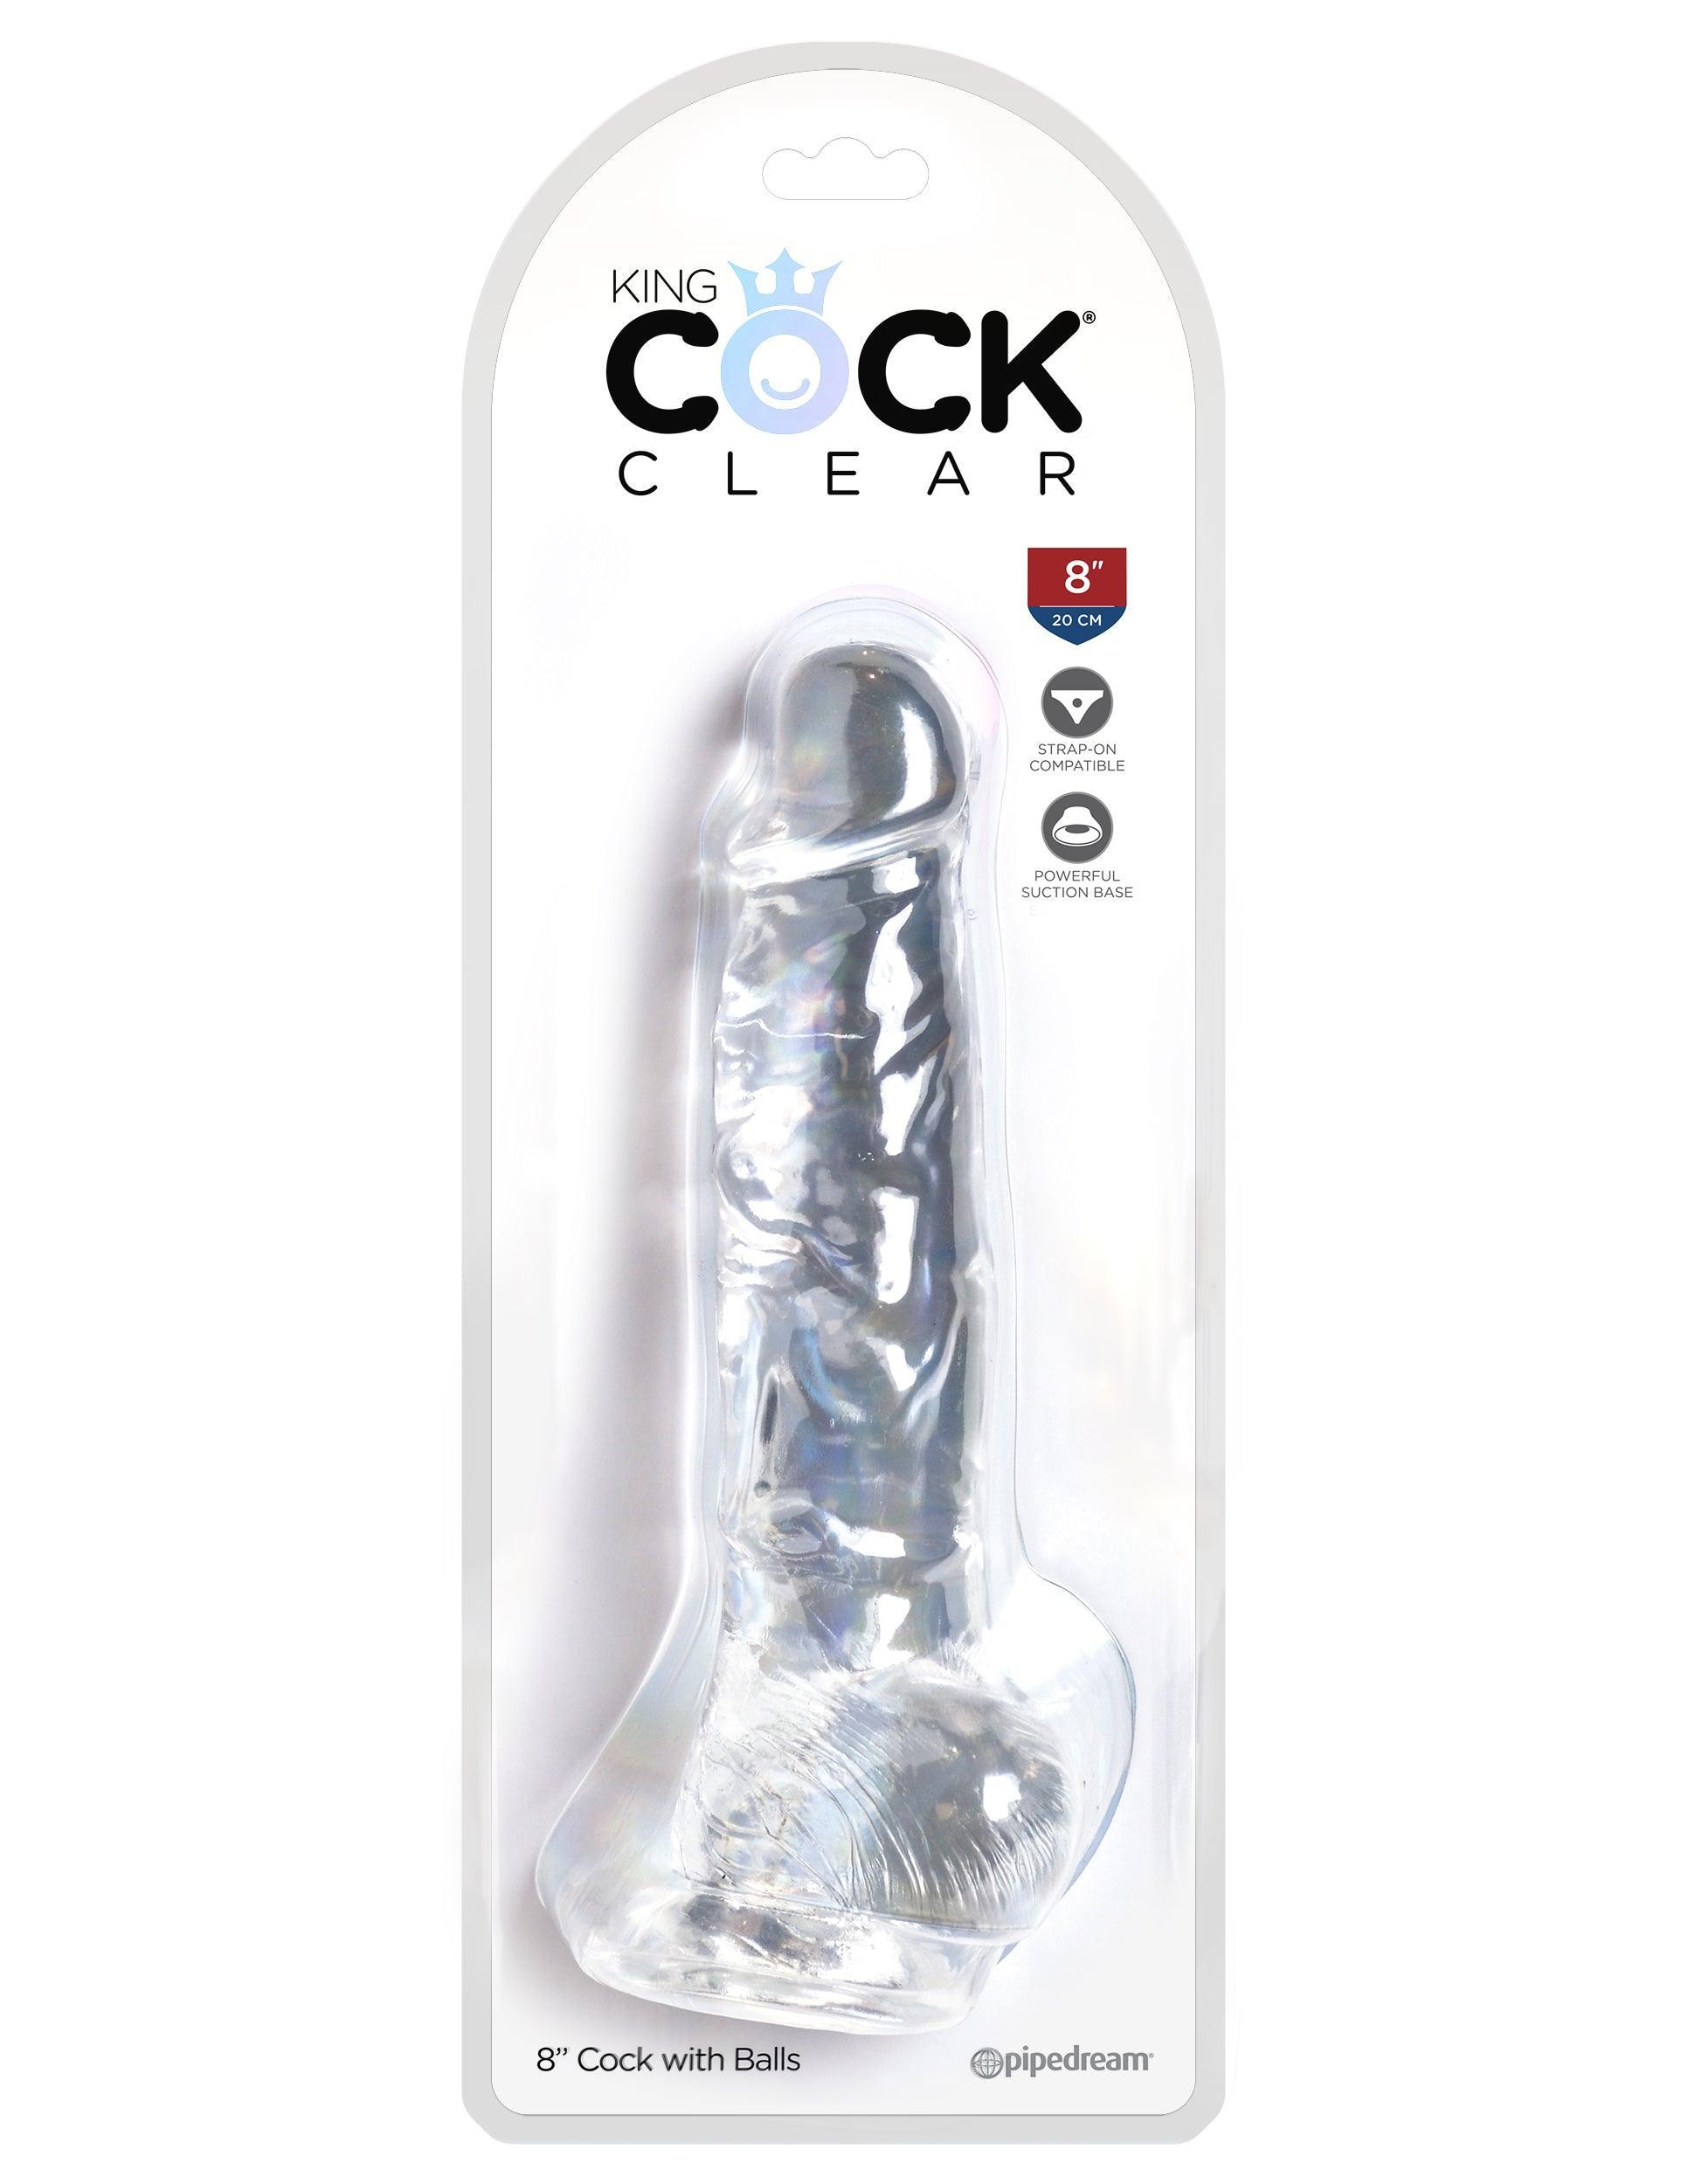 King Cock Clear 8 Inch Cock With Balls - My Sex Toy Hub